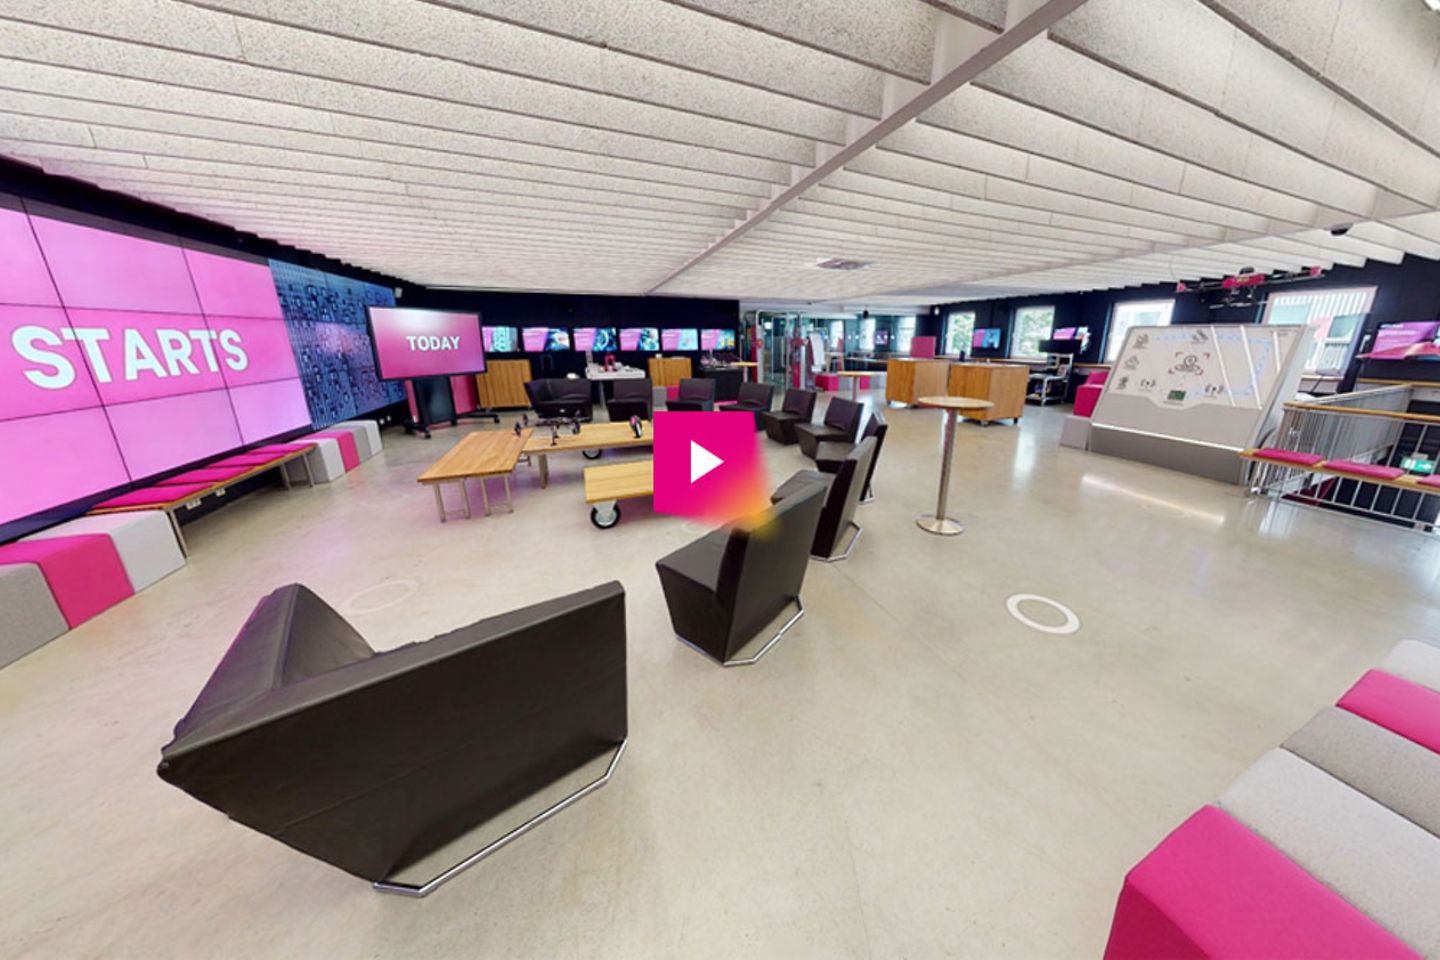 Virtual 3D tour of the Innovation Center in Munich